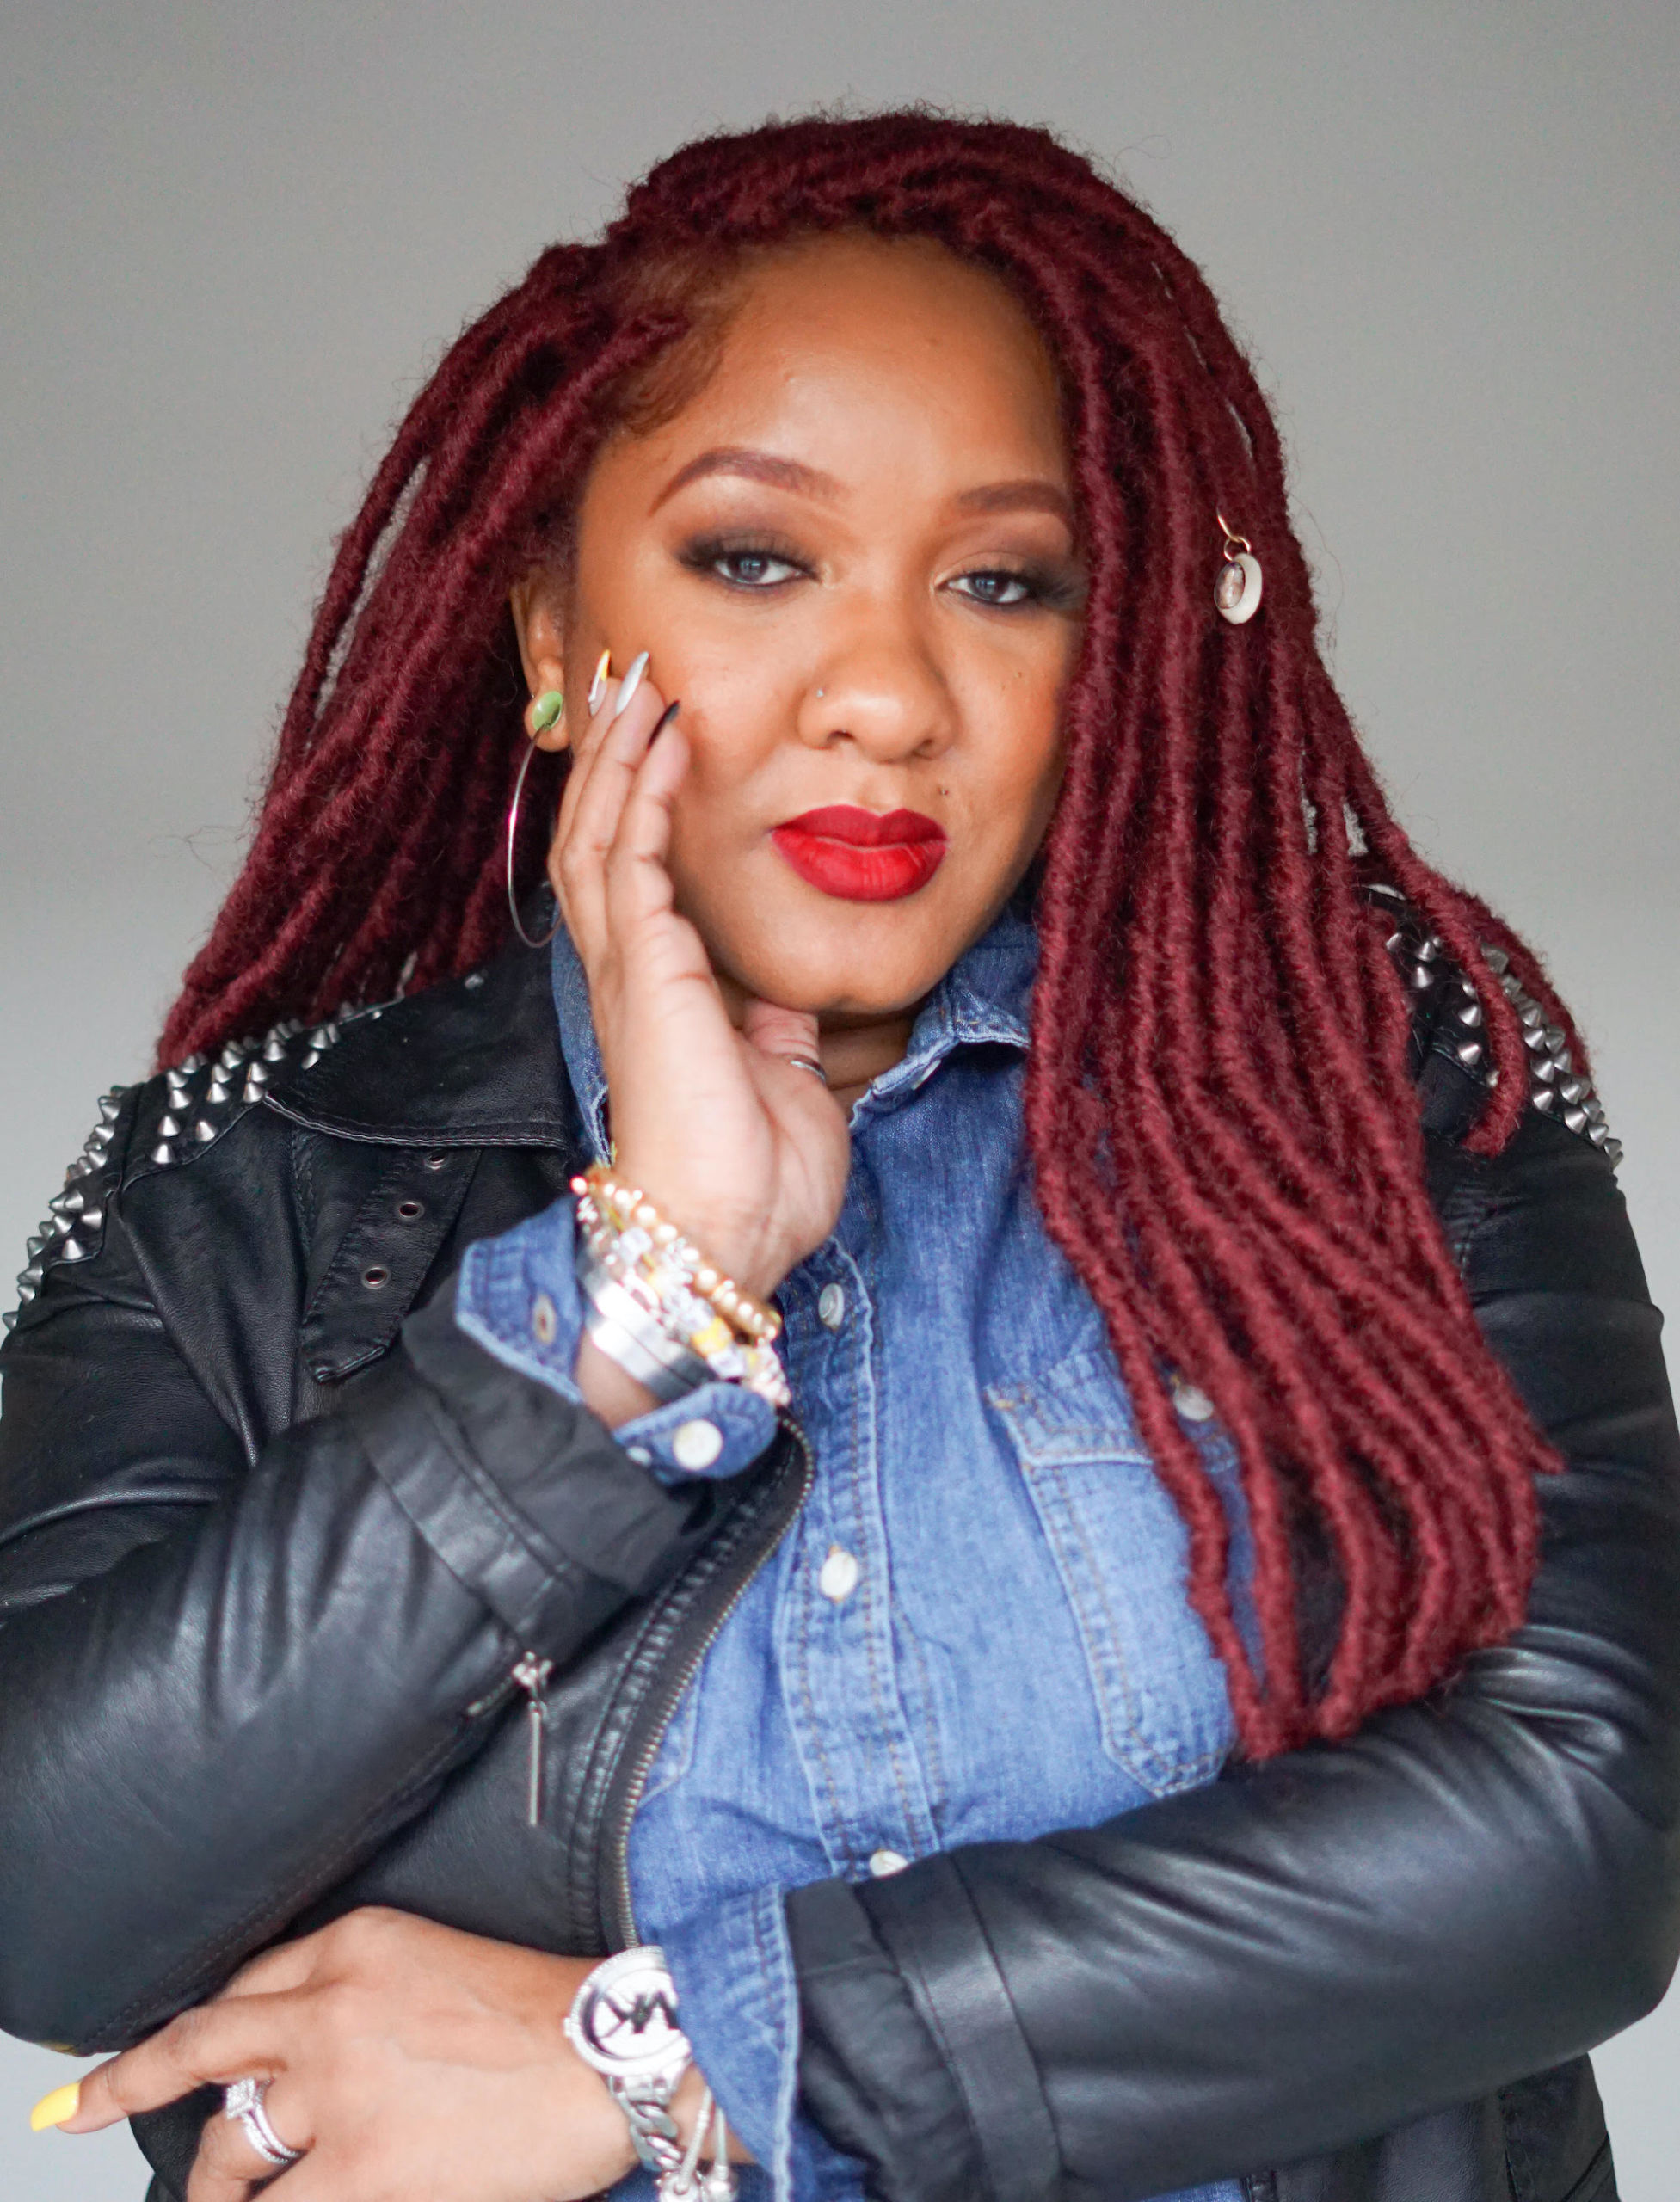 Black woman with long red dreadlocks wears denim shirt with black leather jacket over and looks serious at the camera